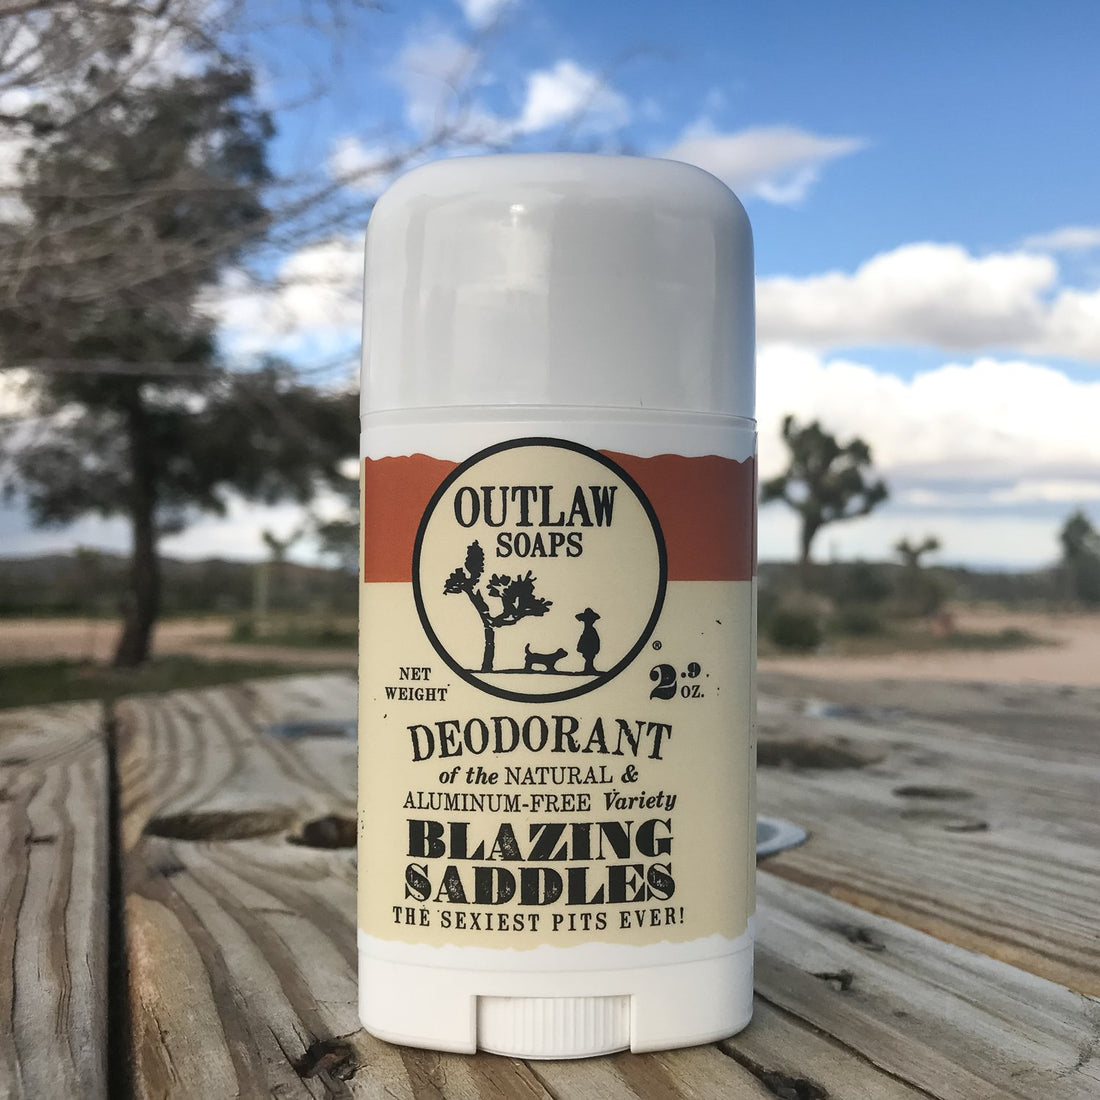 All new Outlaw Soaps Natural DEODORANT!